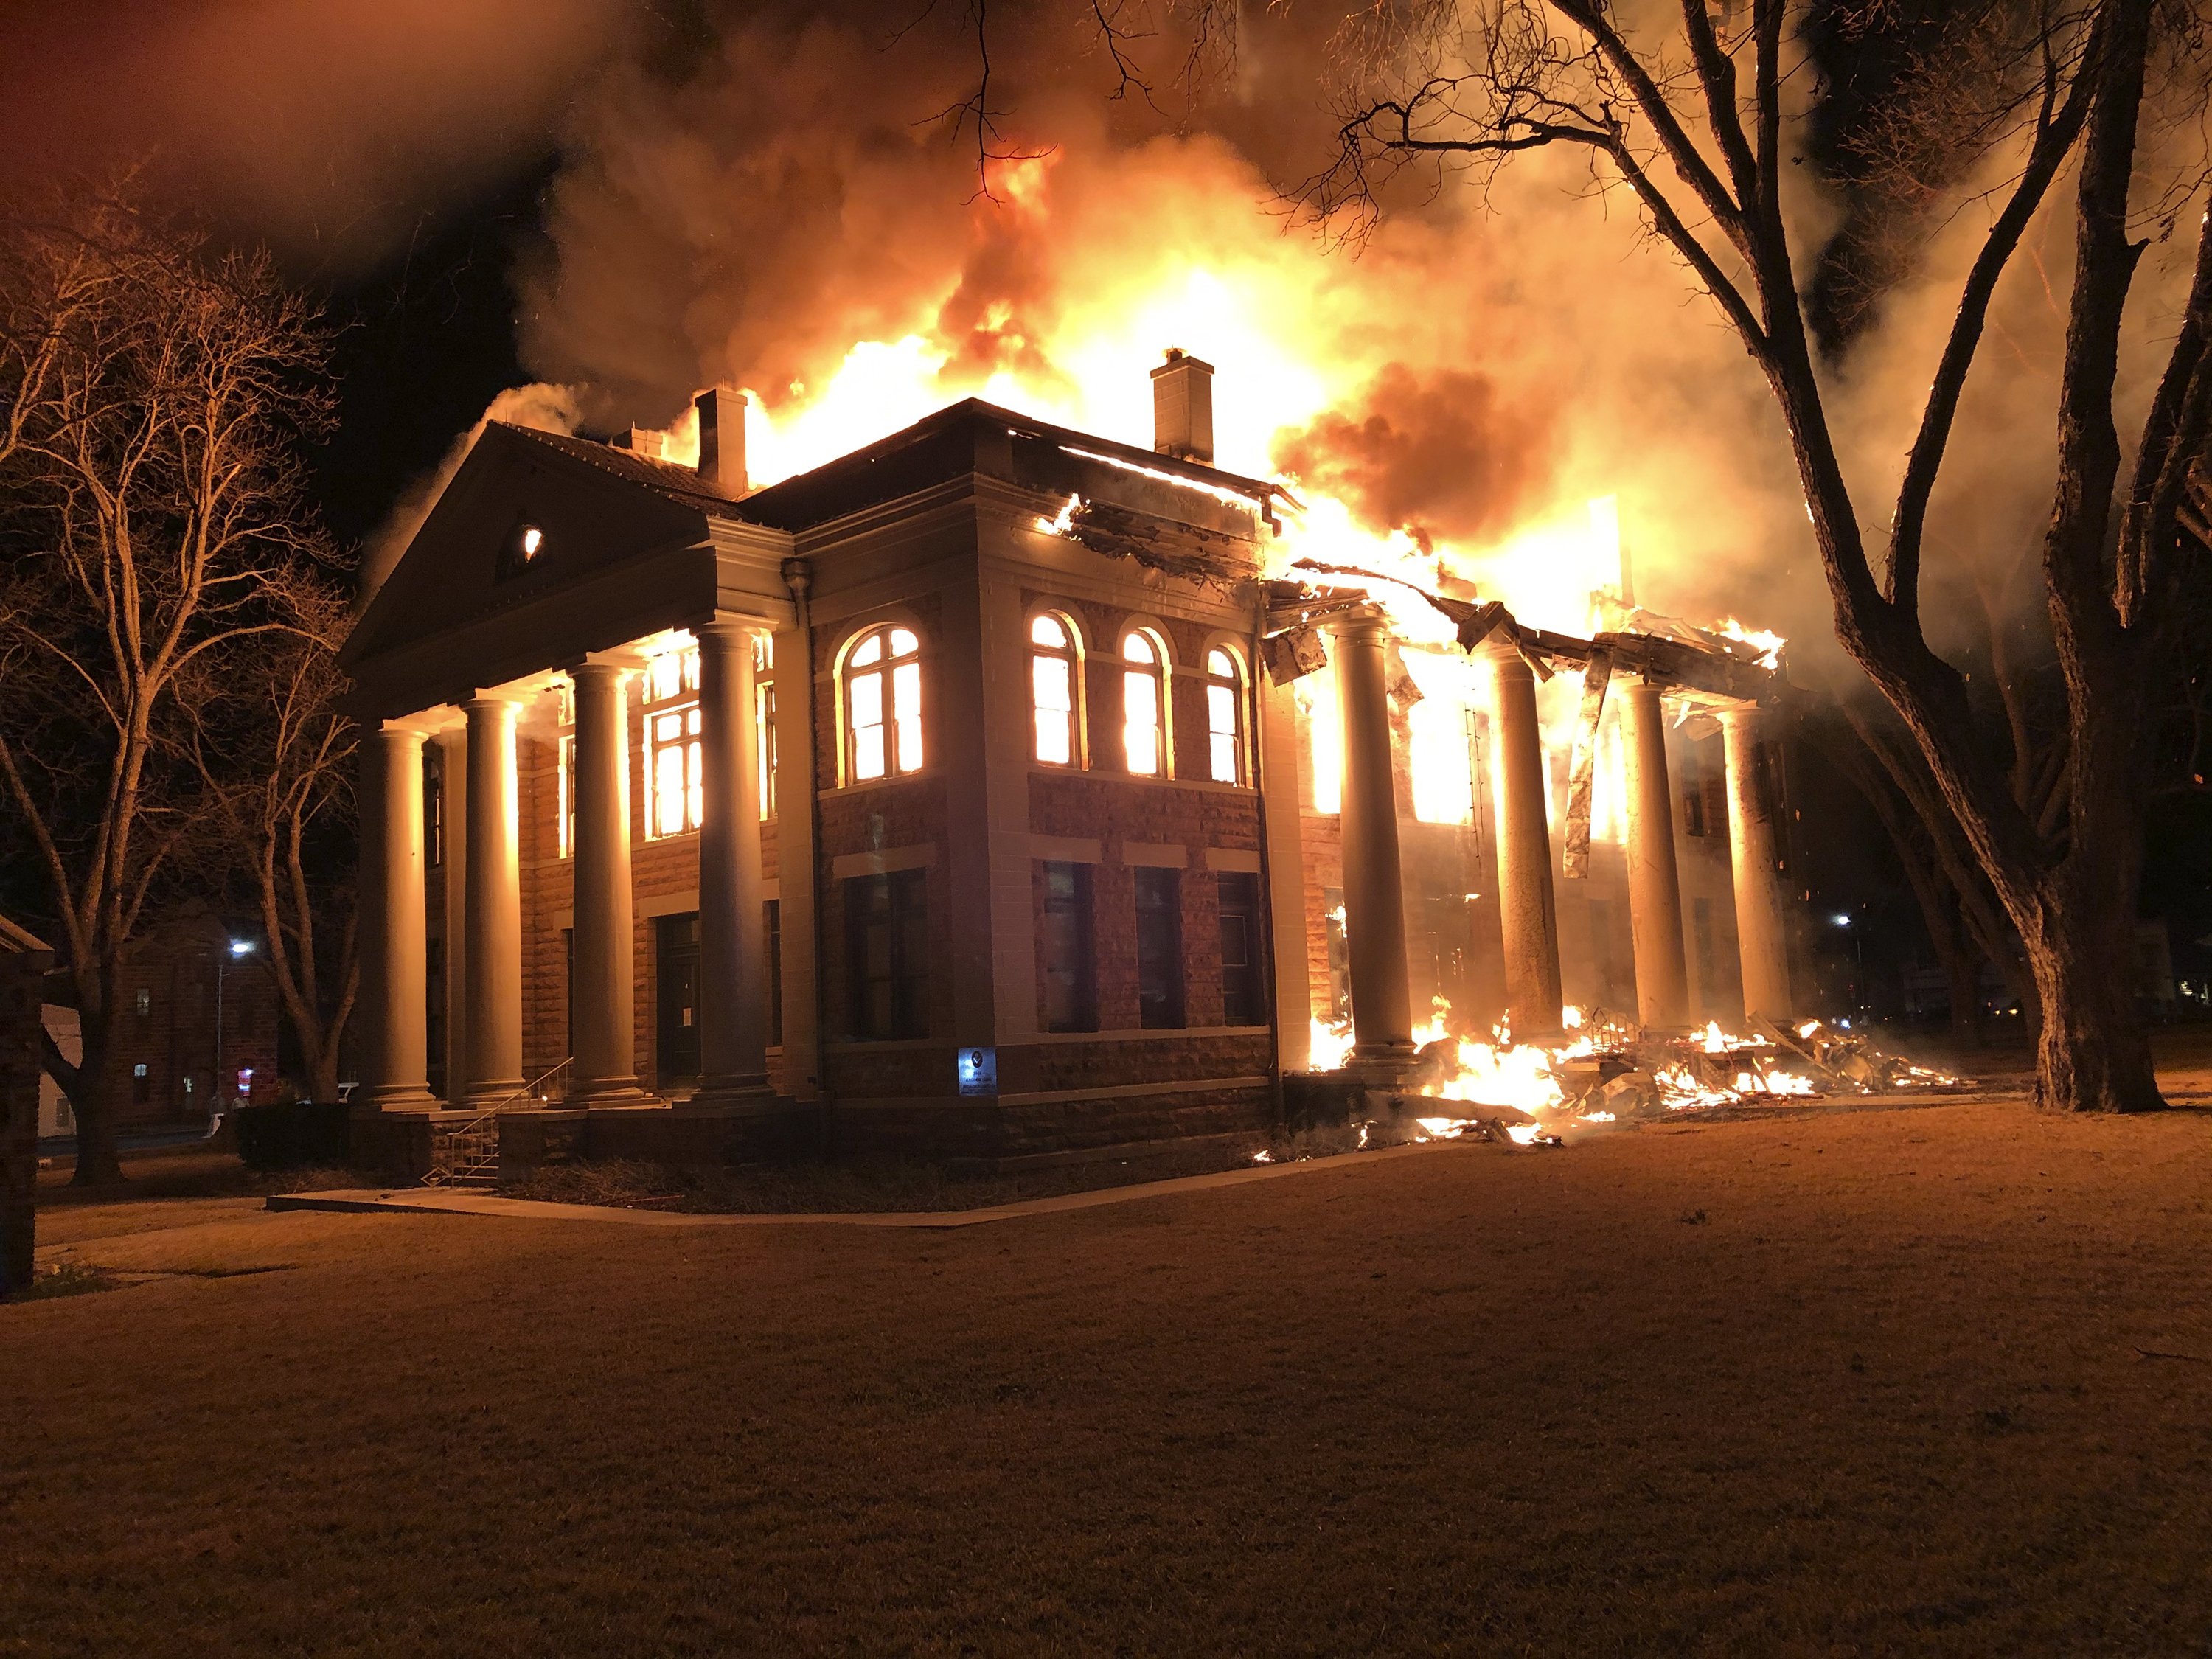 Arson suspected in massive fire in Texas courthouse